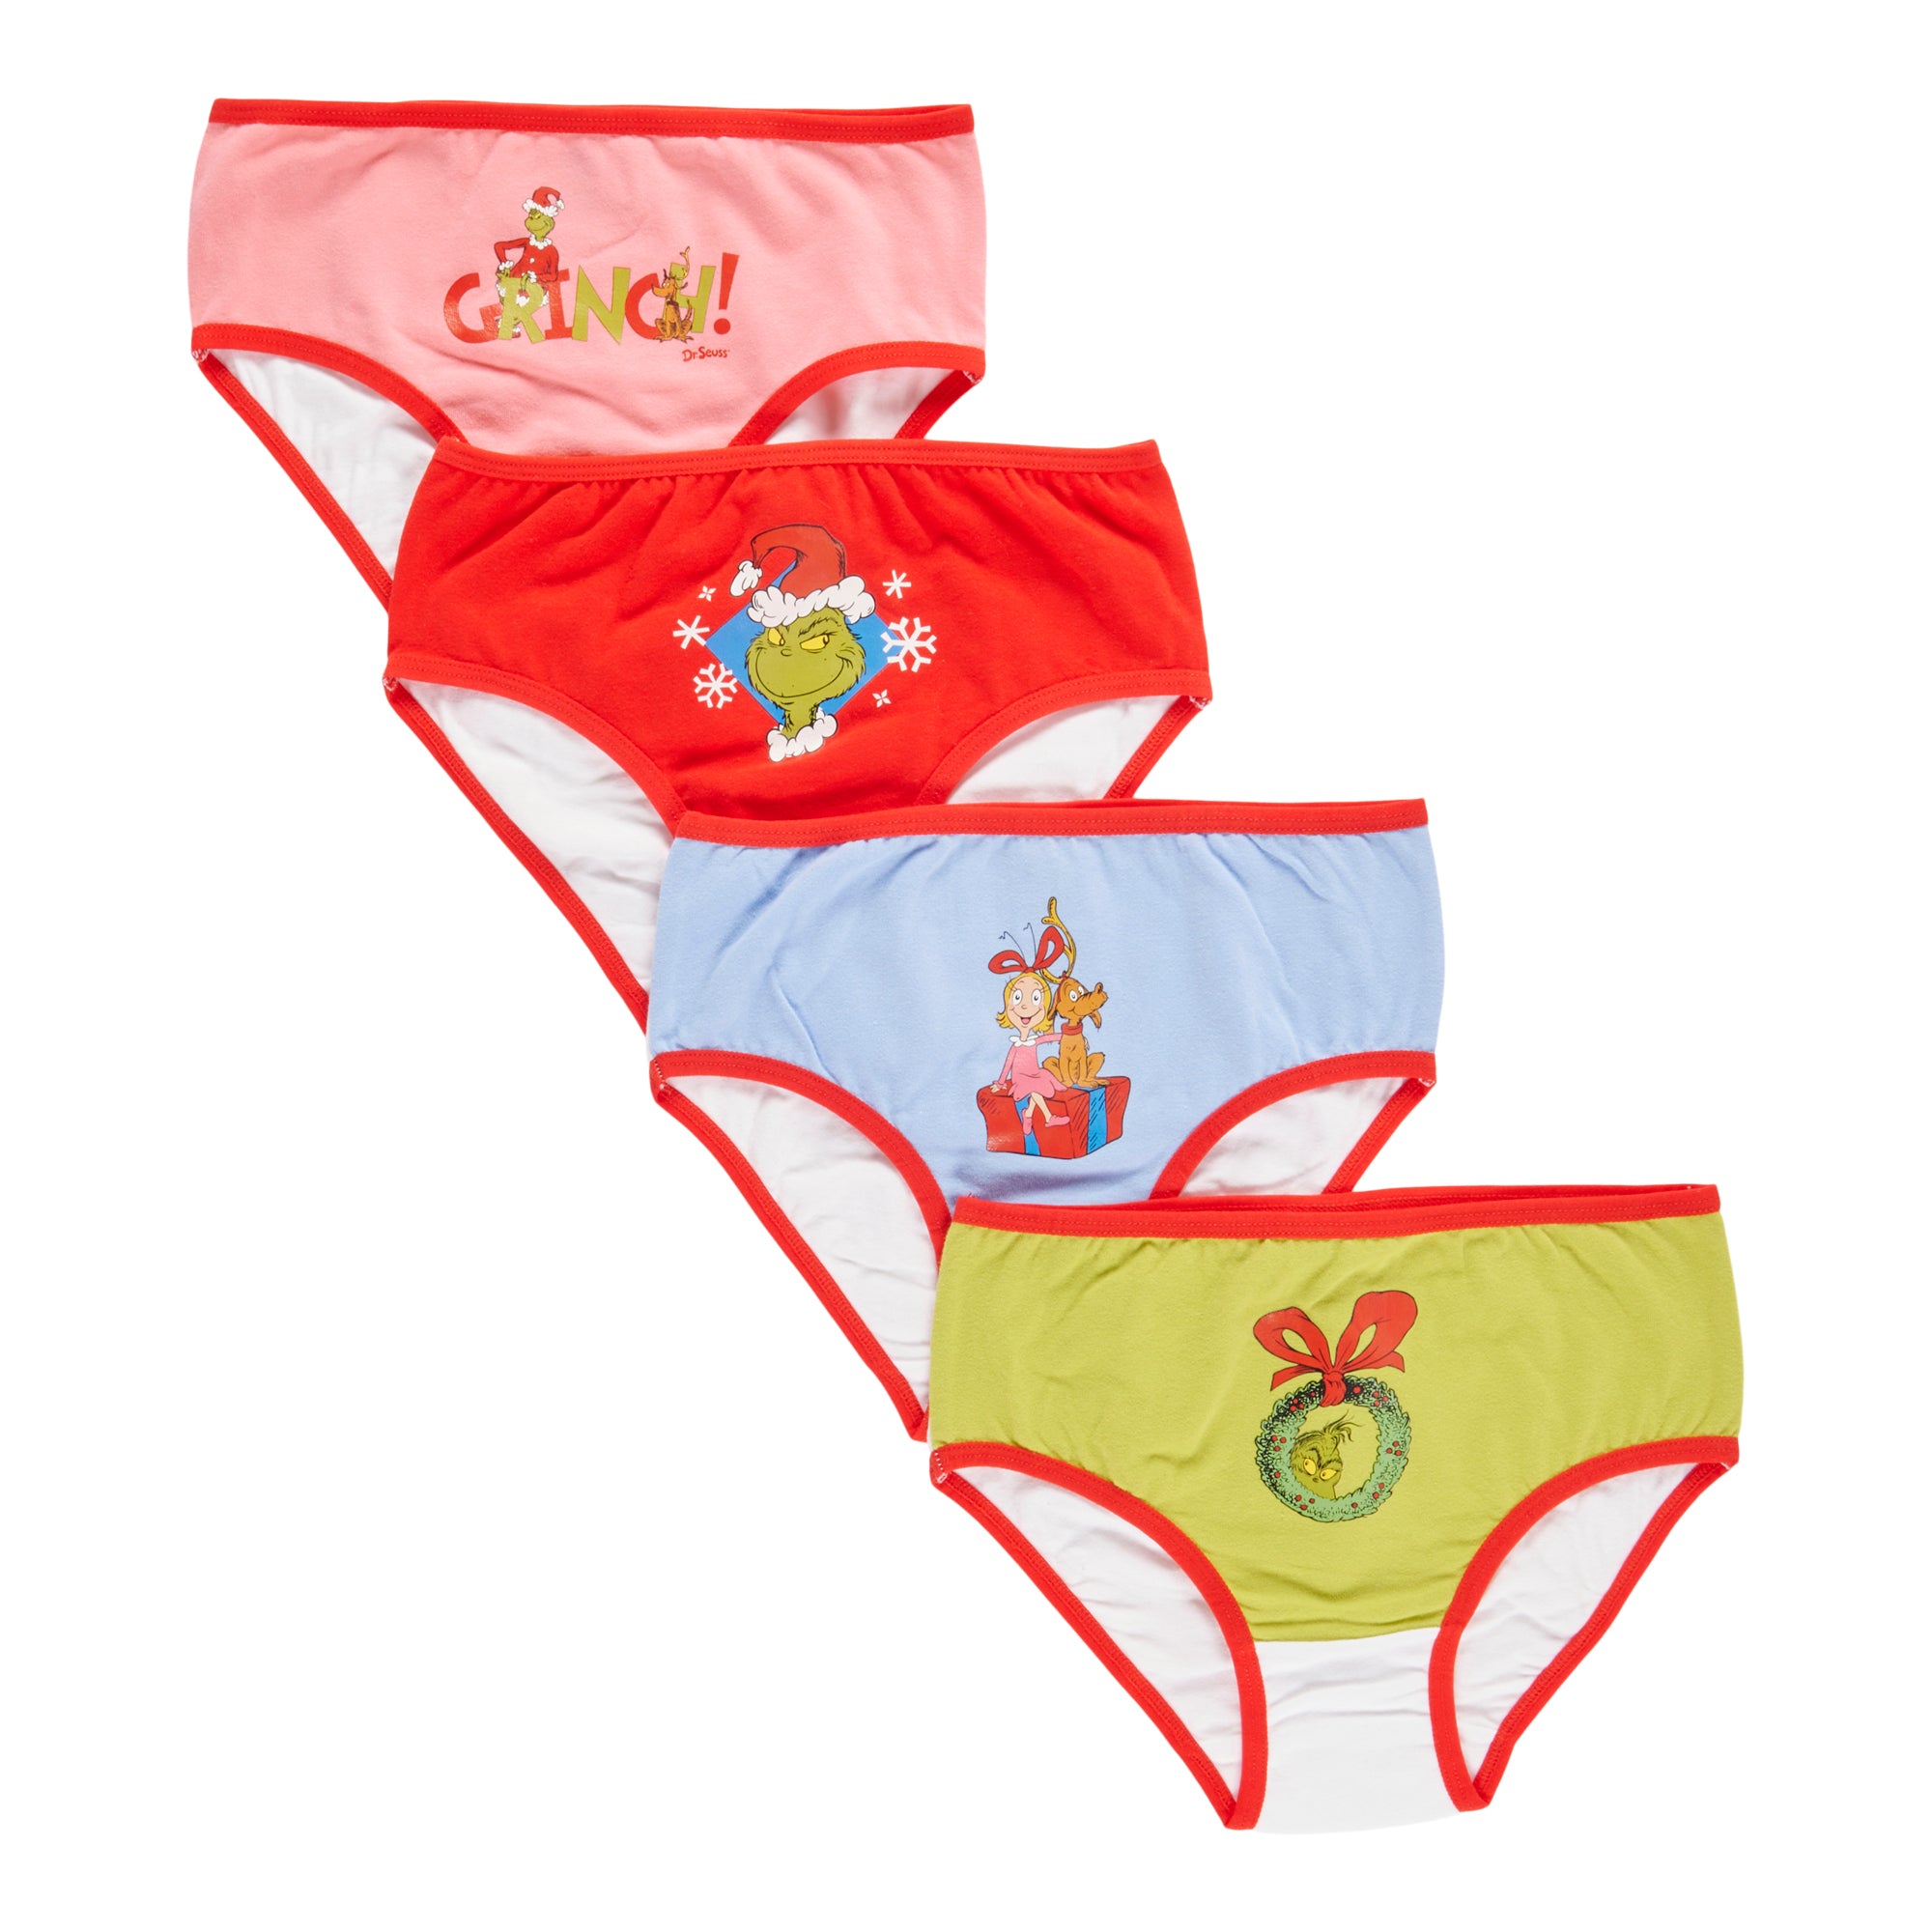 The Grinch Toddler Girl's Underwear, 4-Pack – Giant Tiger